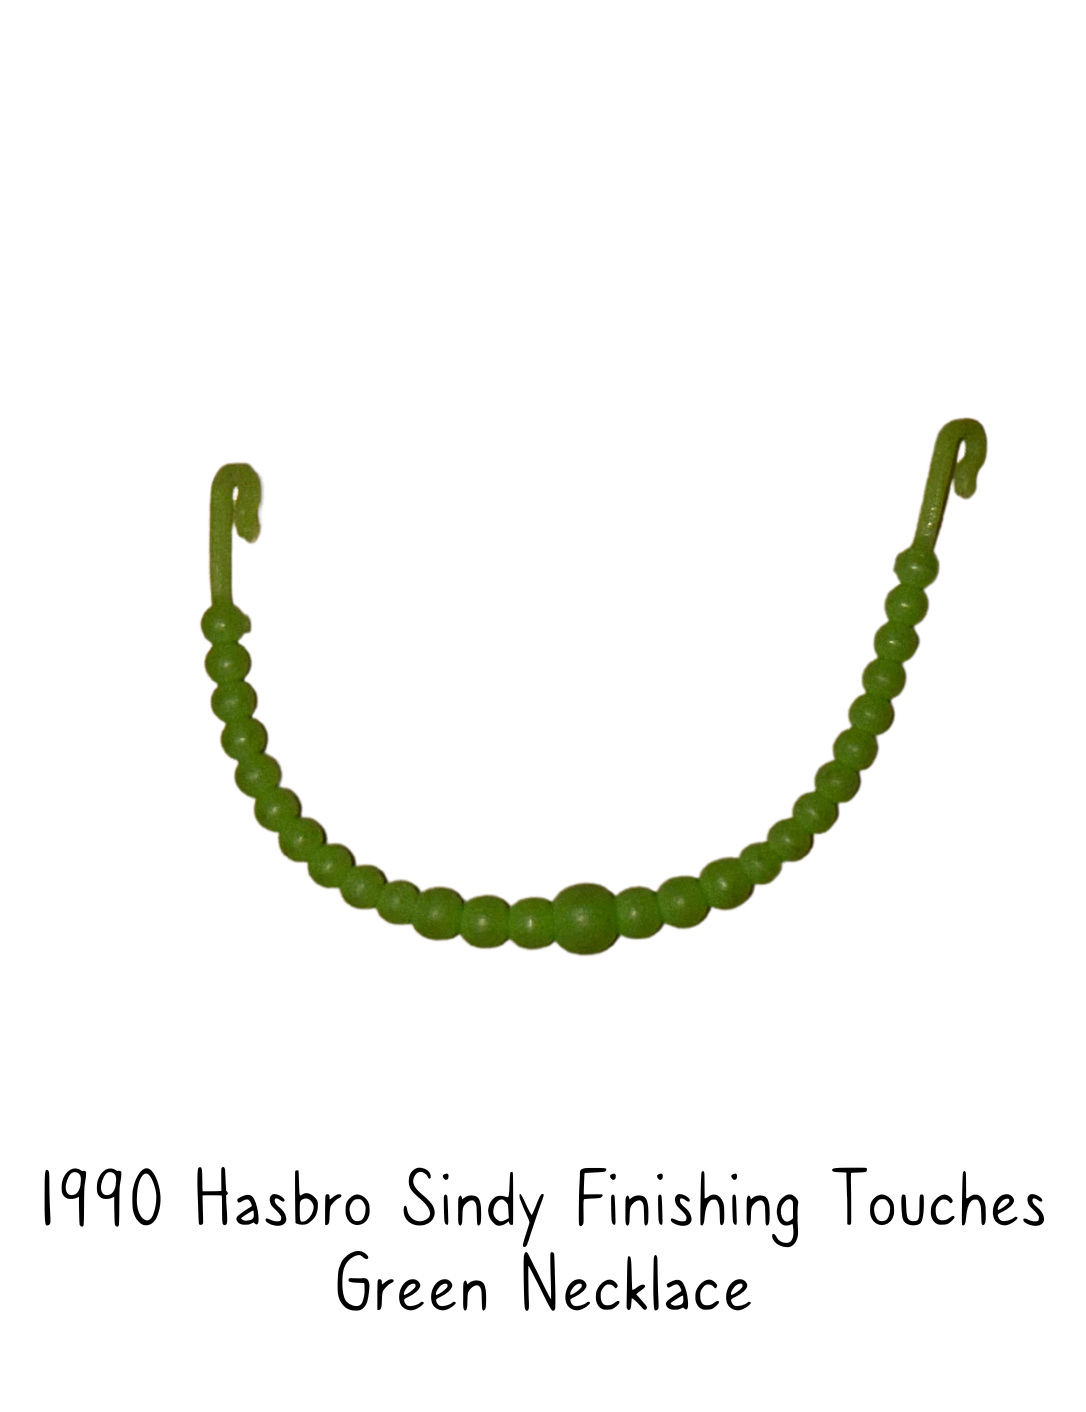 1991 Hasbro Sindy Finishing Touches Green Necklace